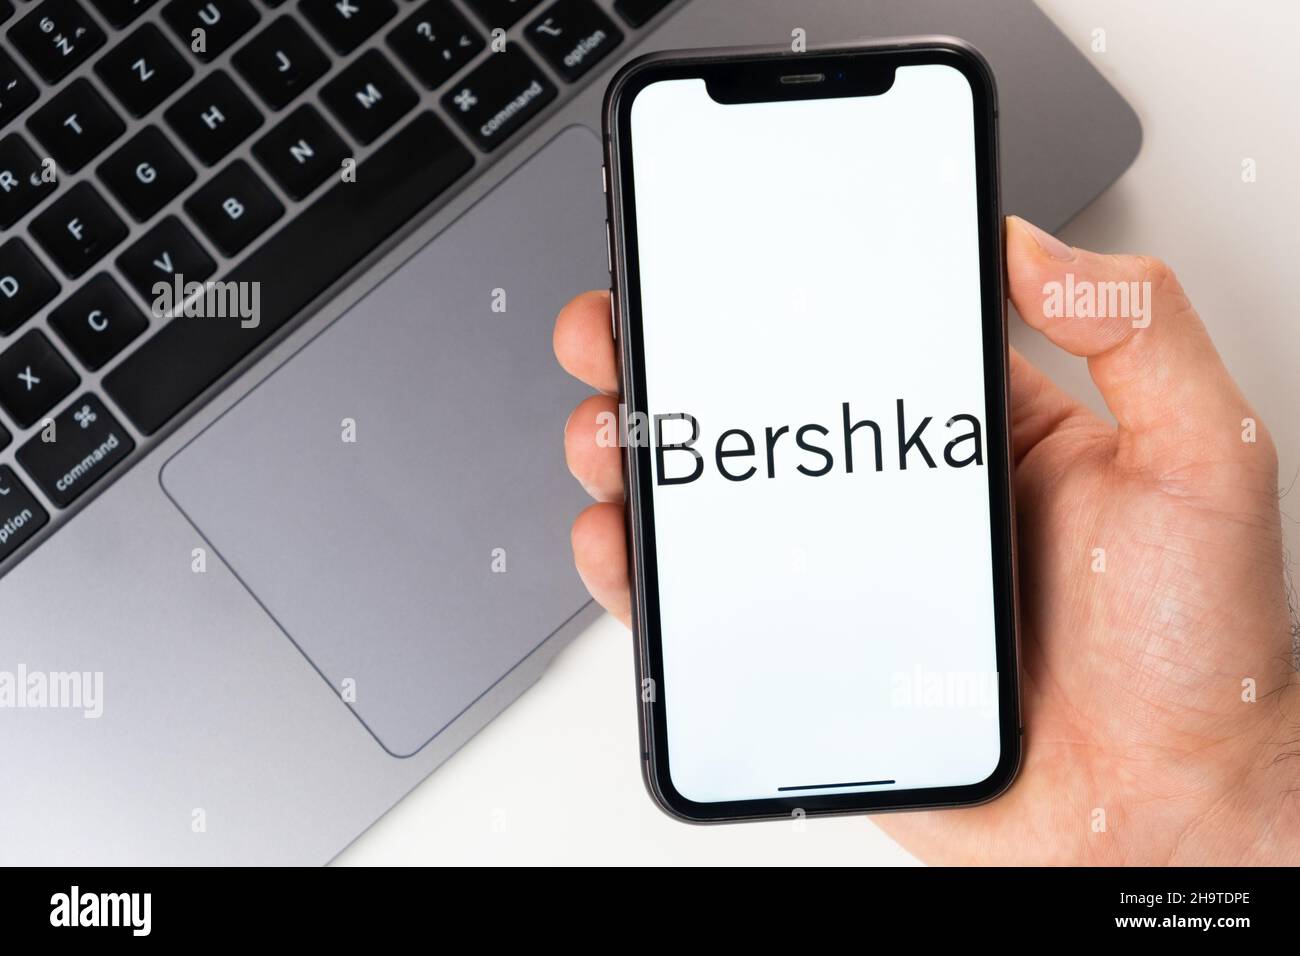 Bershka is a convenient mobile application for buying clothes, shoes and accessories online. A man is holding a smartphone with an open application in his hand. Online shopping November 2021, San Francisco, USA Stock Photo